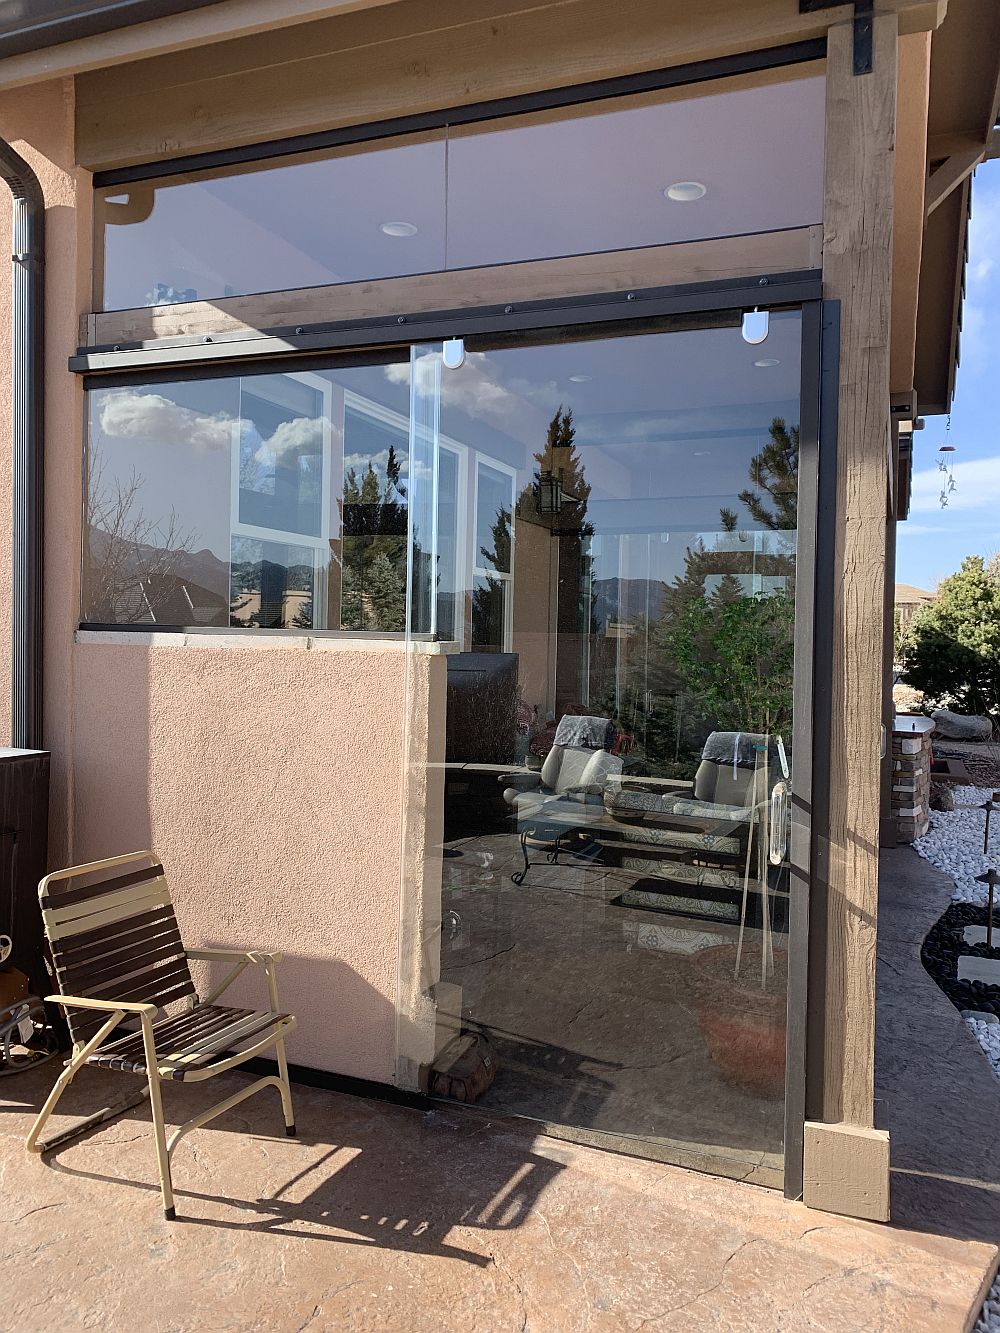 Sliding glass door leading into glass enclosed patio